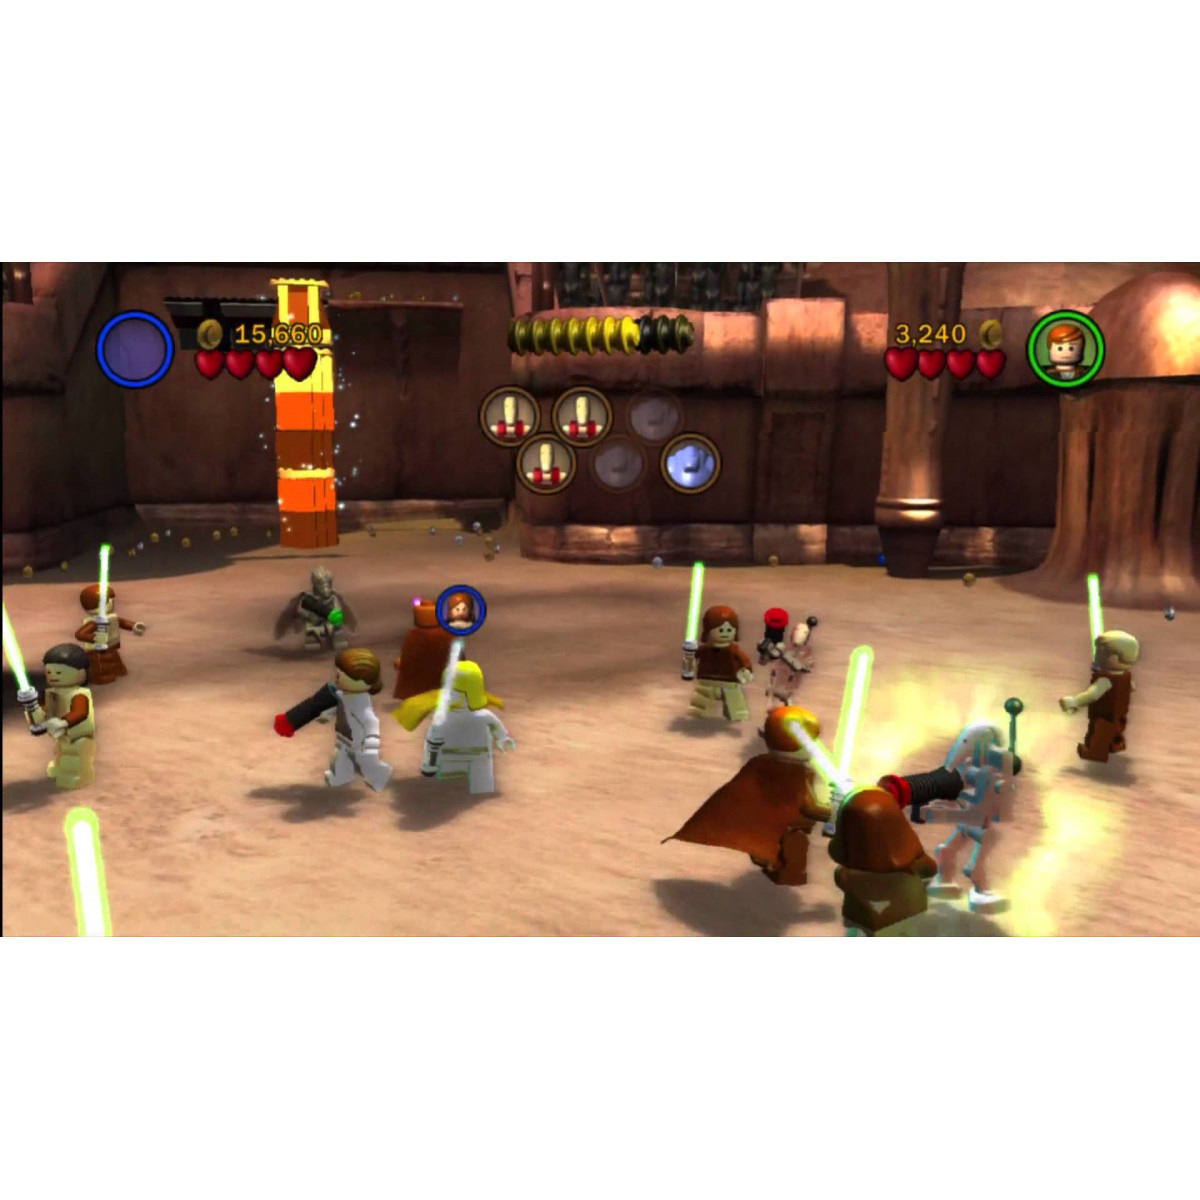 was lego star wars the. complete saga on psp